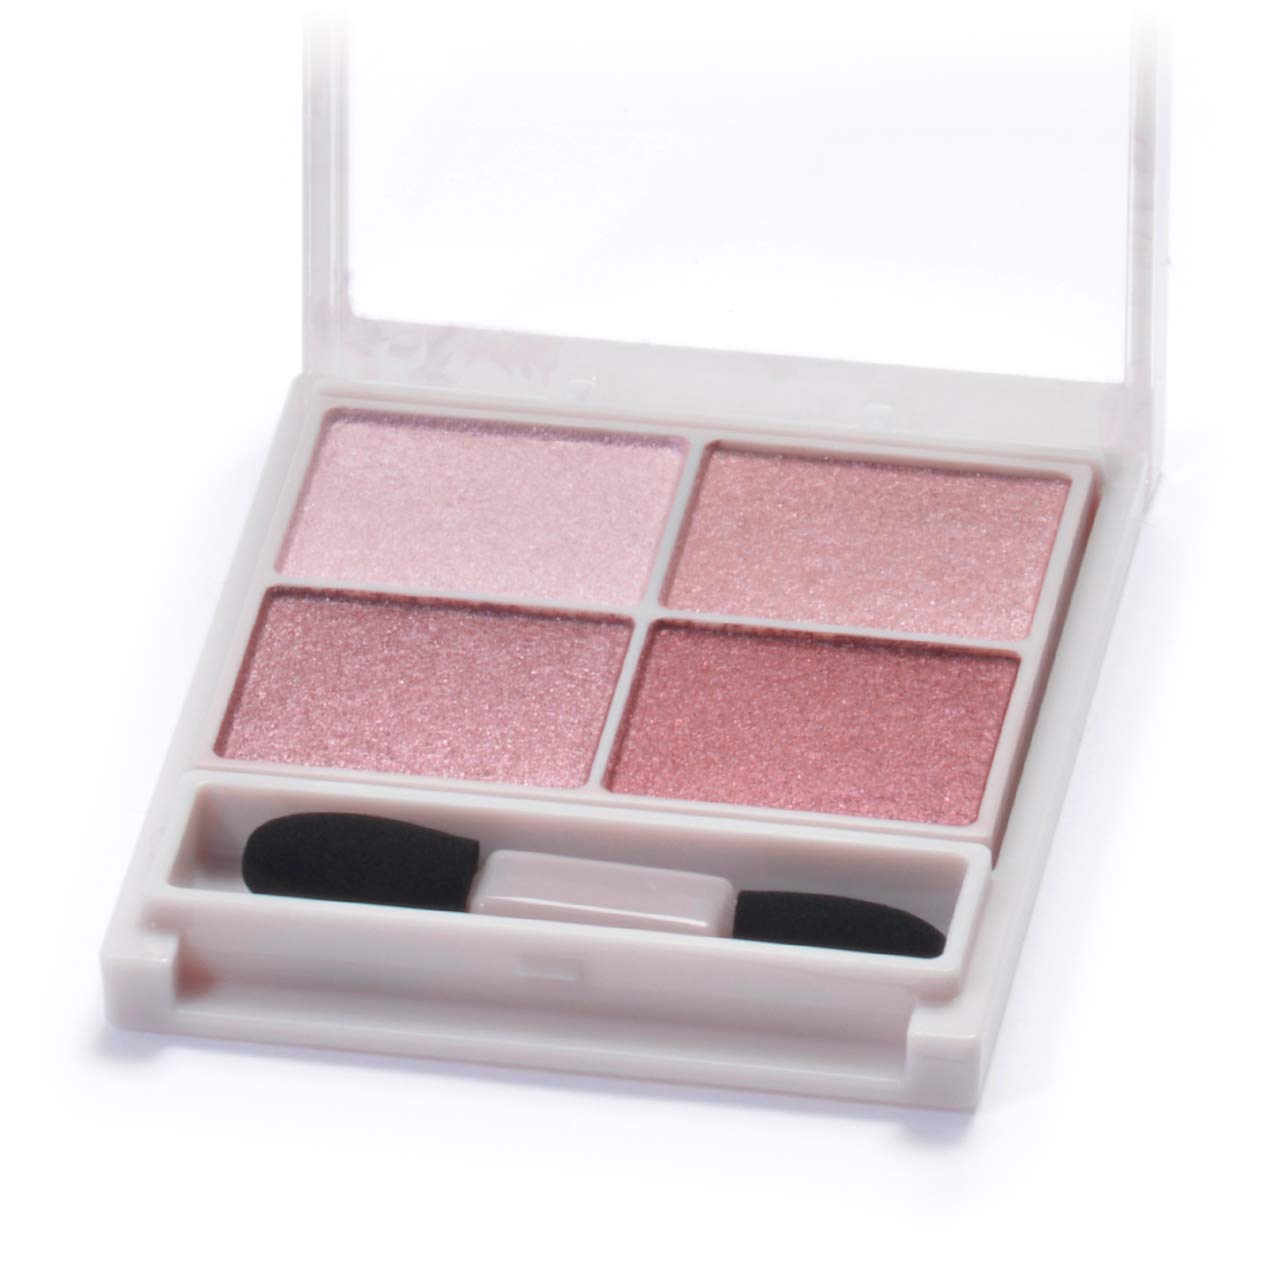 Rmk Official Stone Whip Eyes 07 Cool Glamor - Cream Eye Shadow Single Color Pearl